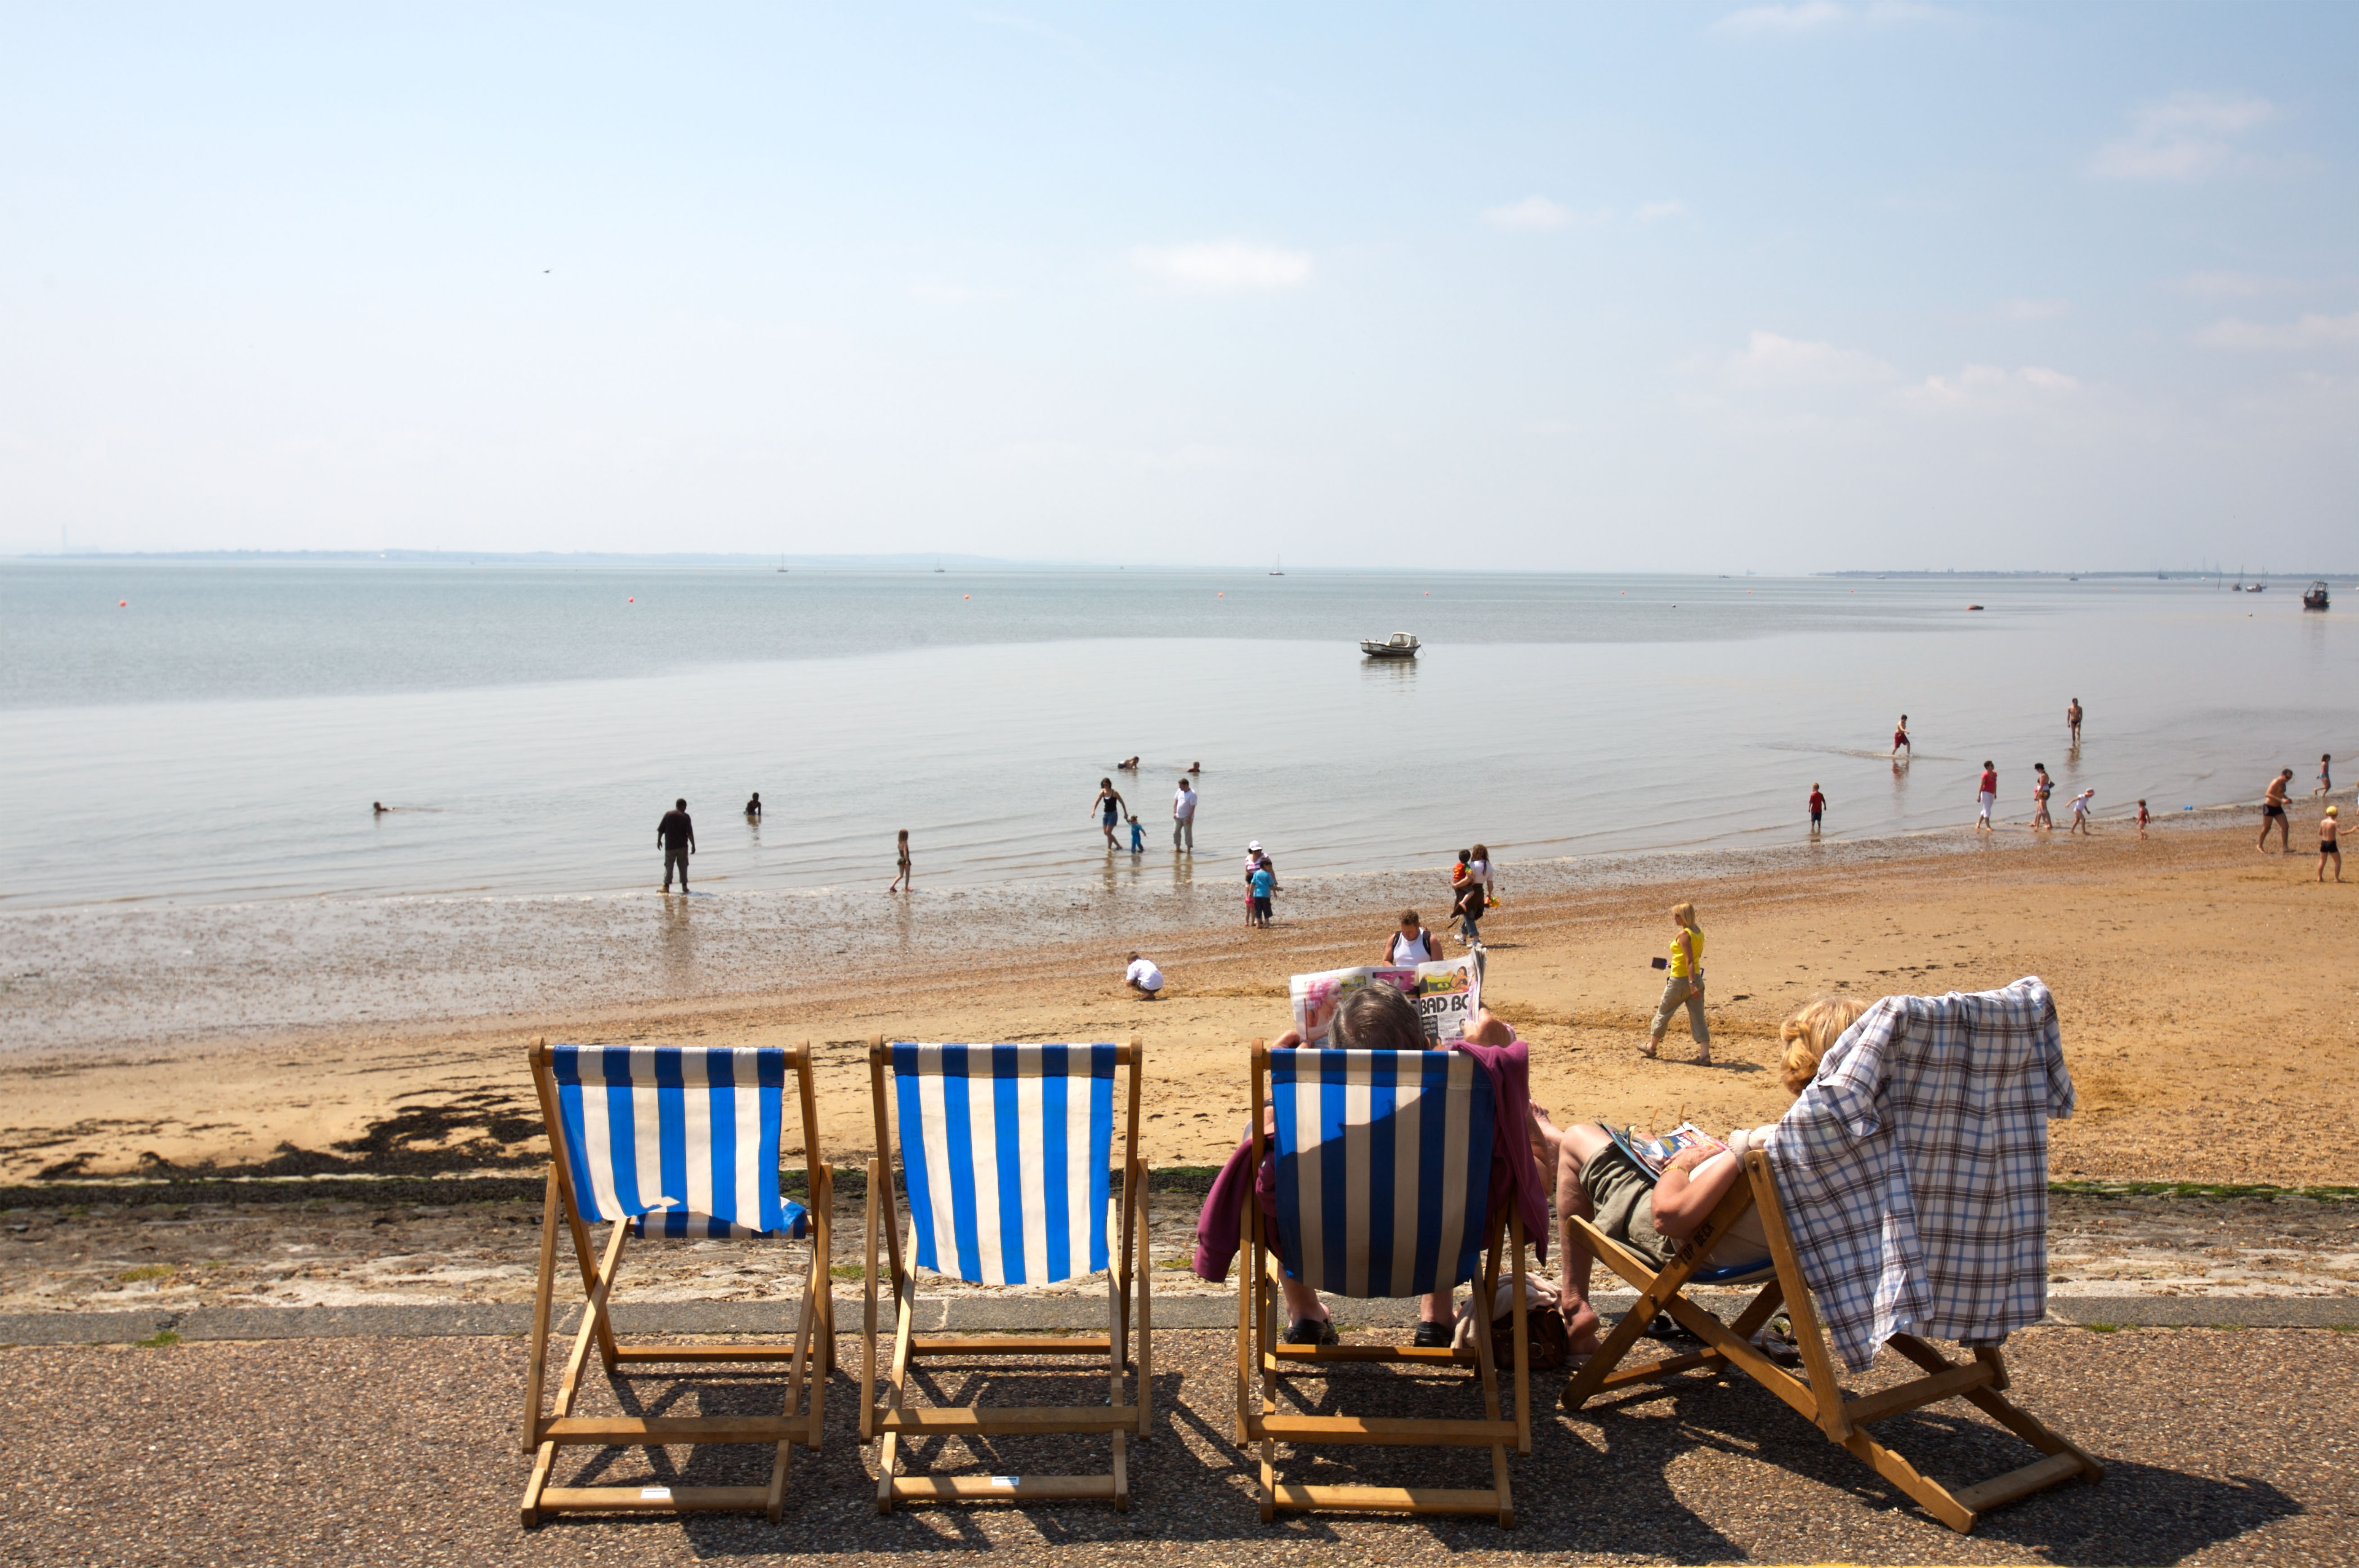 A popular seaside town could become the most expensive in the UK